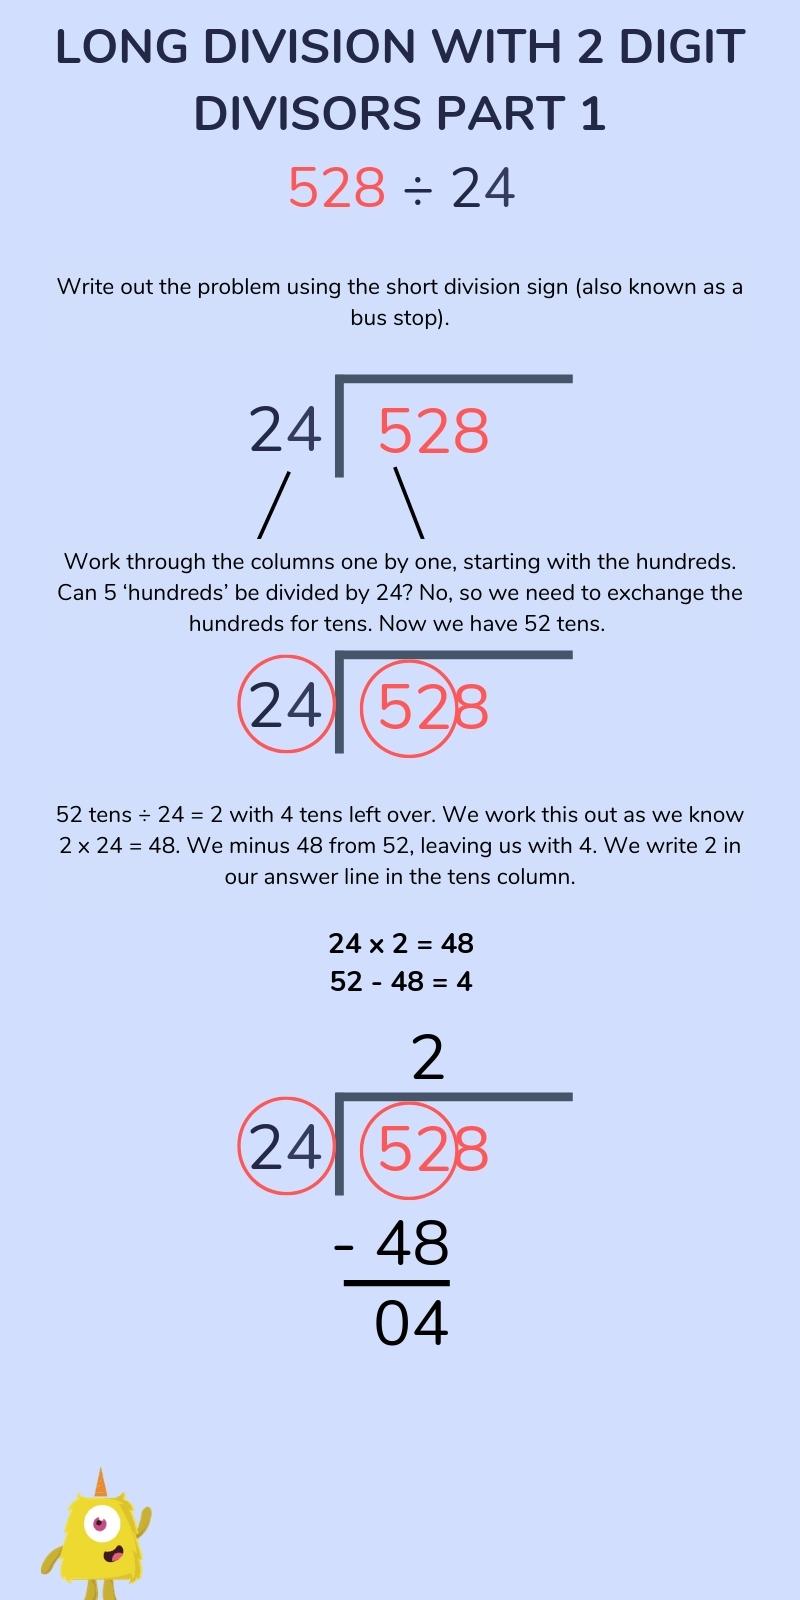 long division with 2 digit divisors part 1